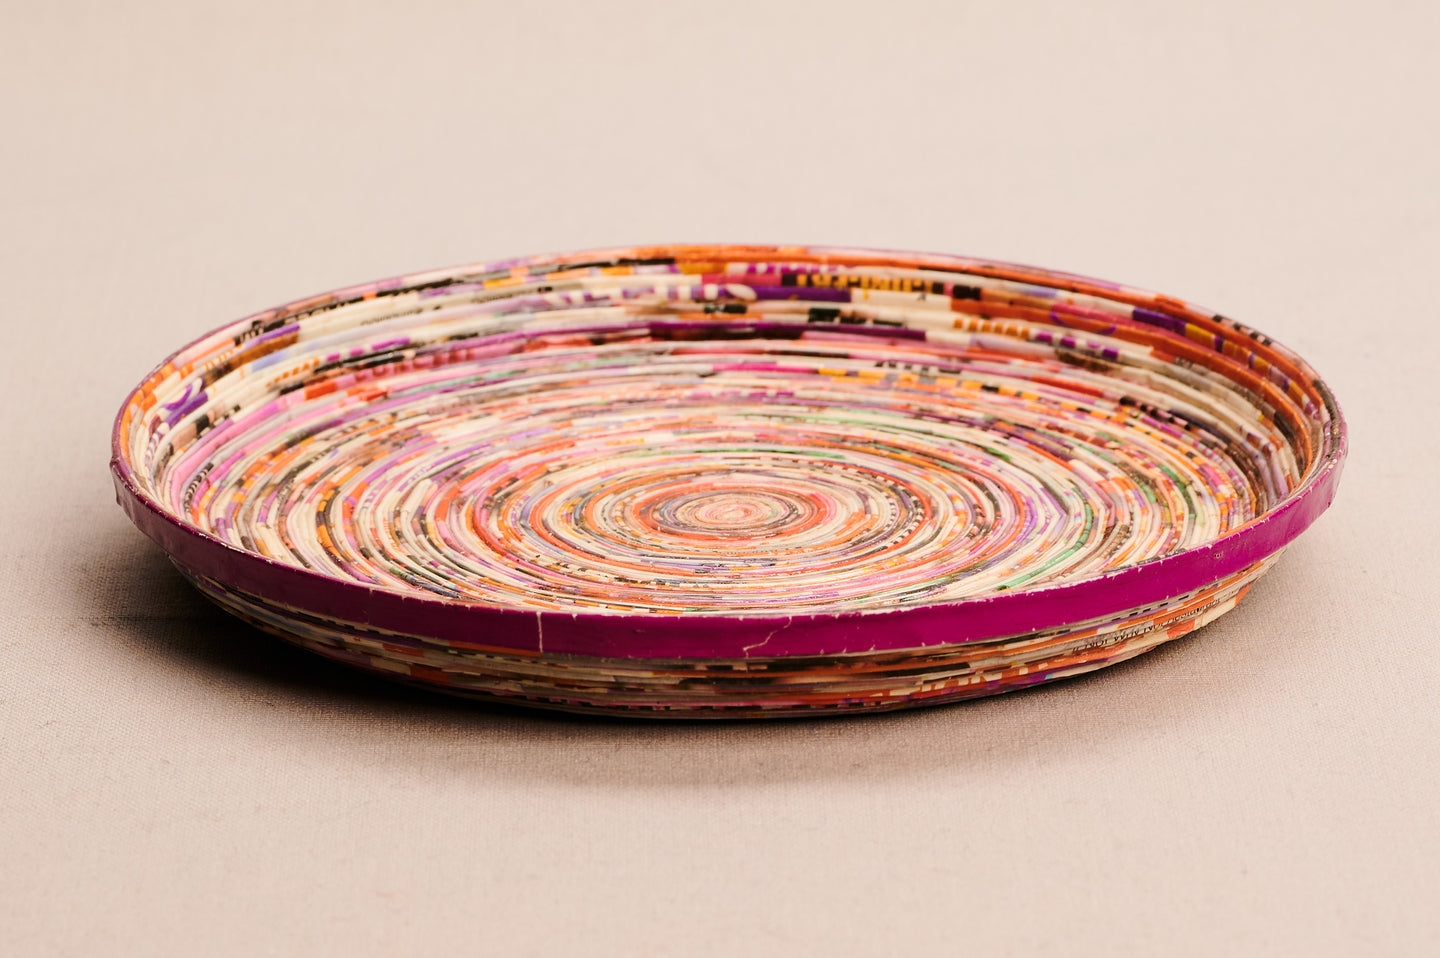 Medium-sized decorative tray made of recycled paper 